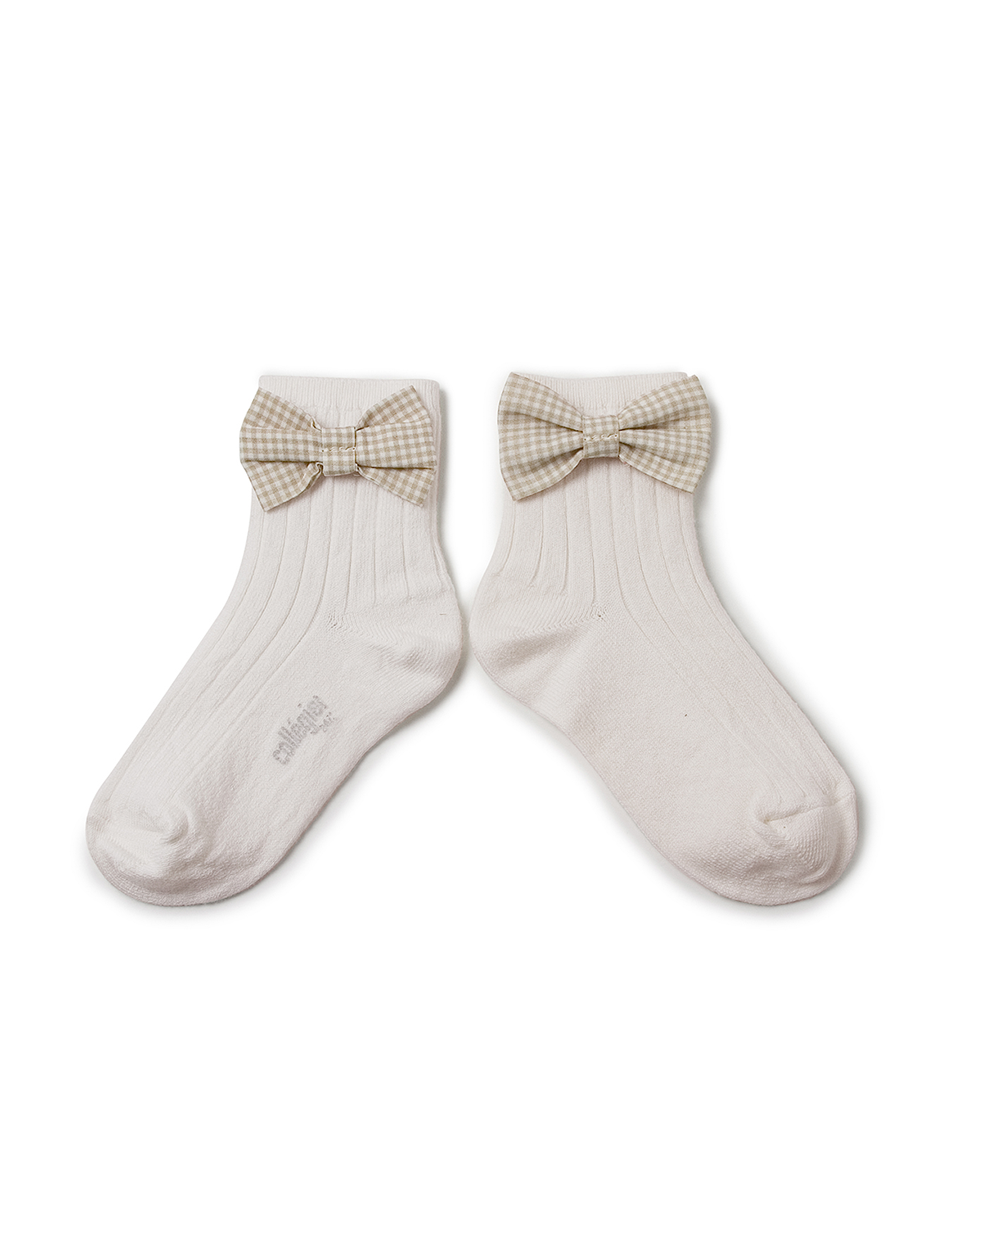 [Collégien] Colette - Ribbed Ankle Socks with Gingham bow - Blanc Neige